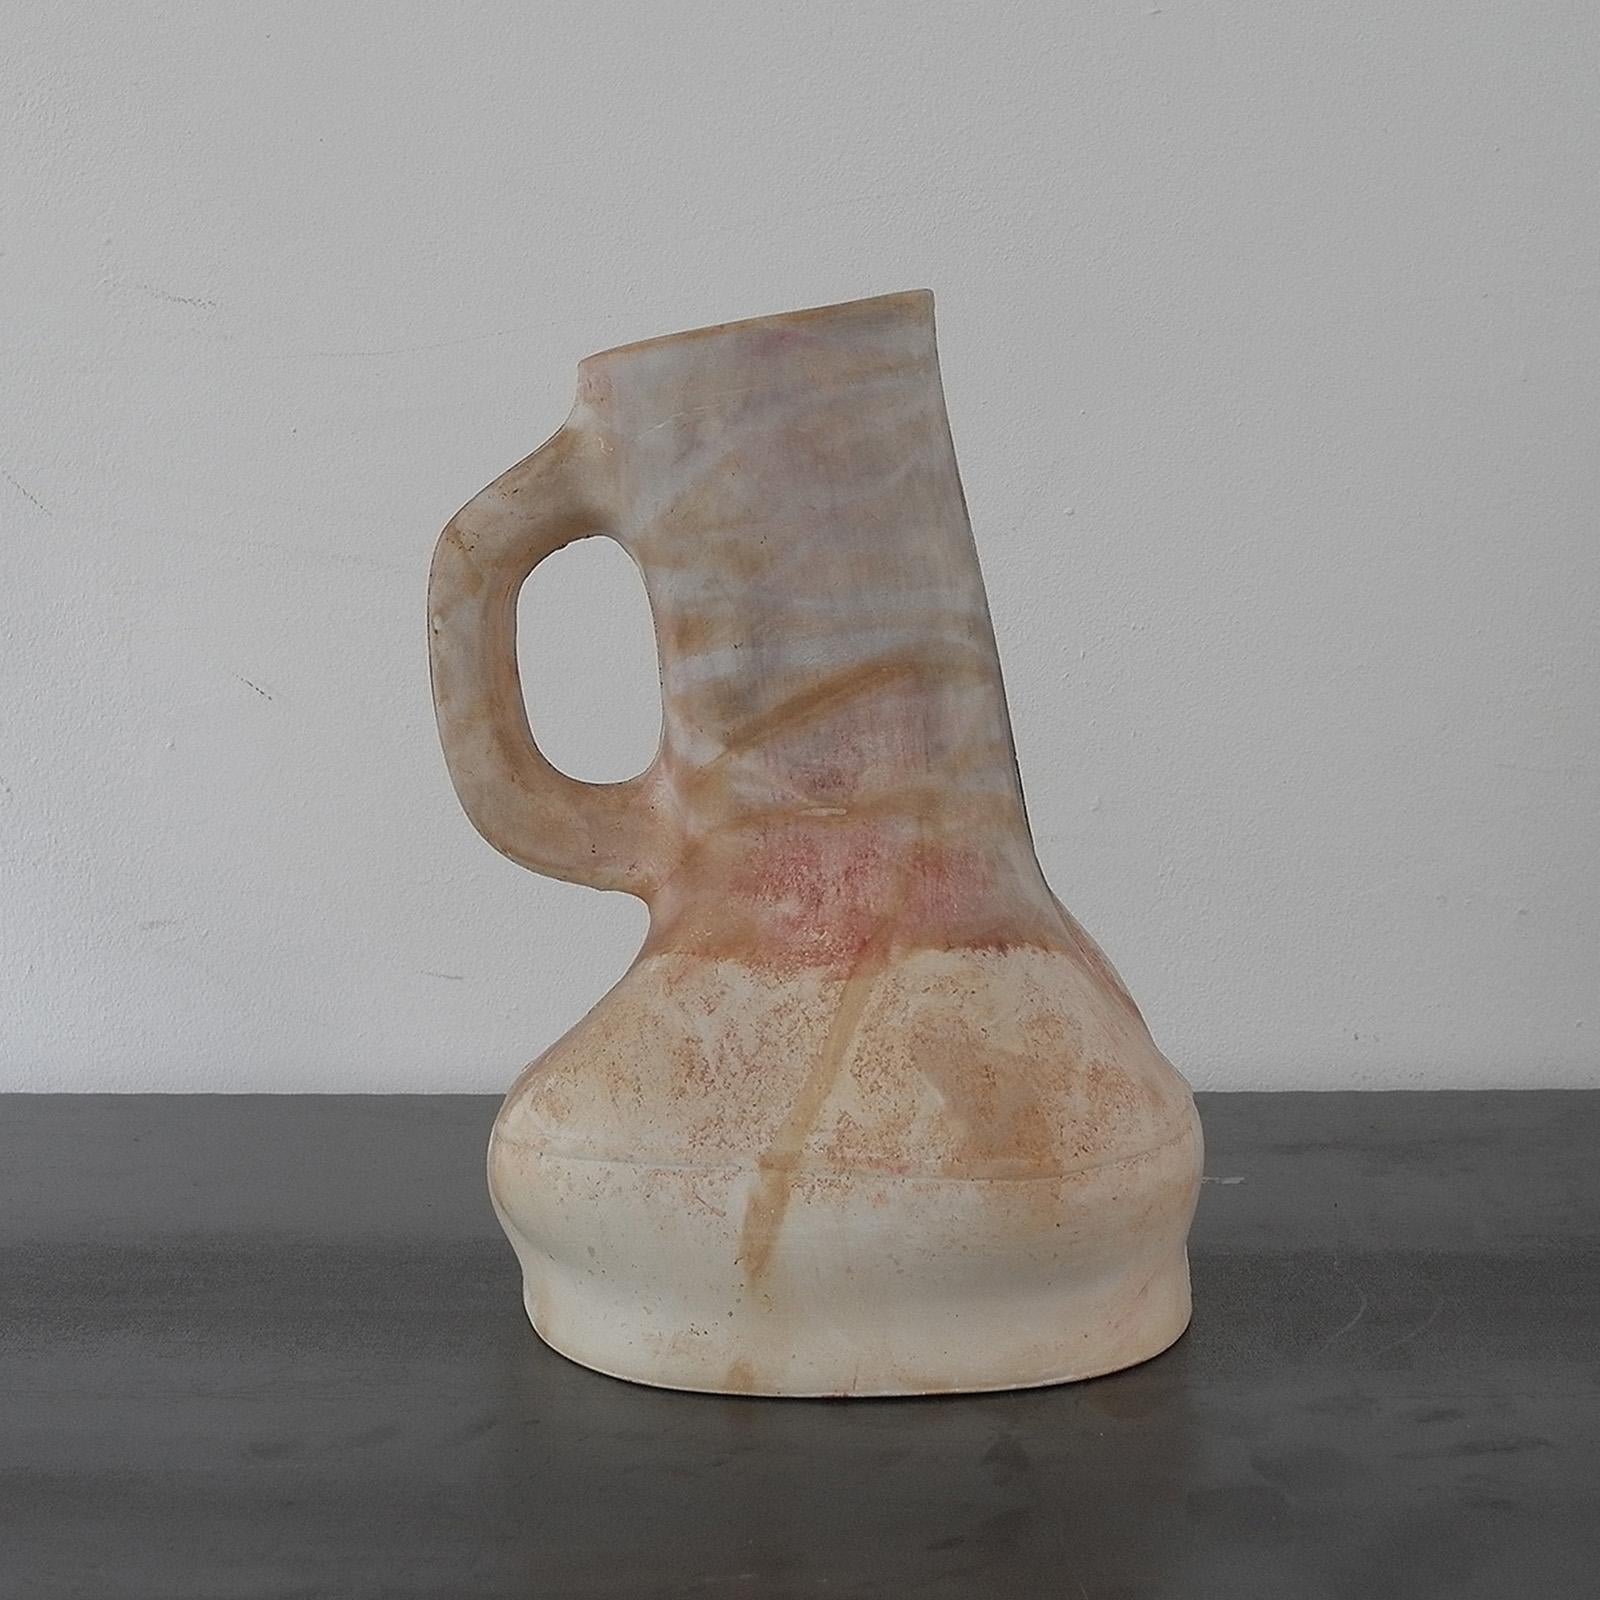 “We are what we make” says Nacho Carbonell about his work. Nacho Carbonell creates a kettle which communicates its state through body language, showing us how to treat it. Hot Kettles are jugs which seem to be on the point of liquefying in ceramic,